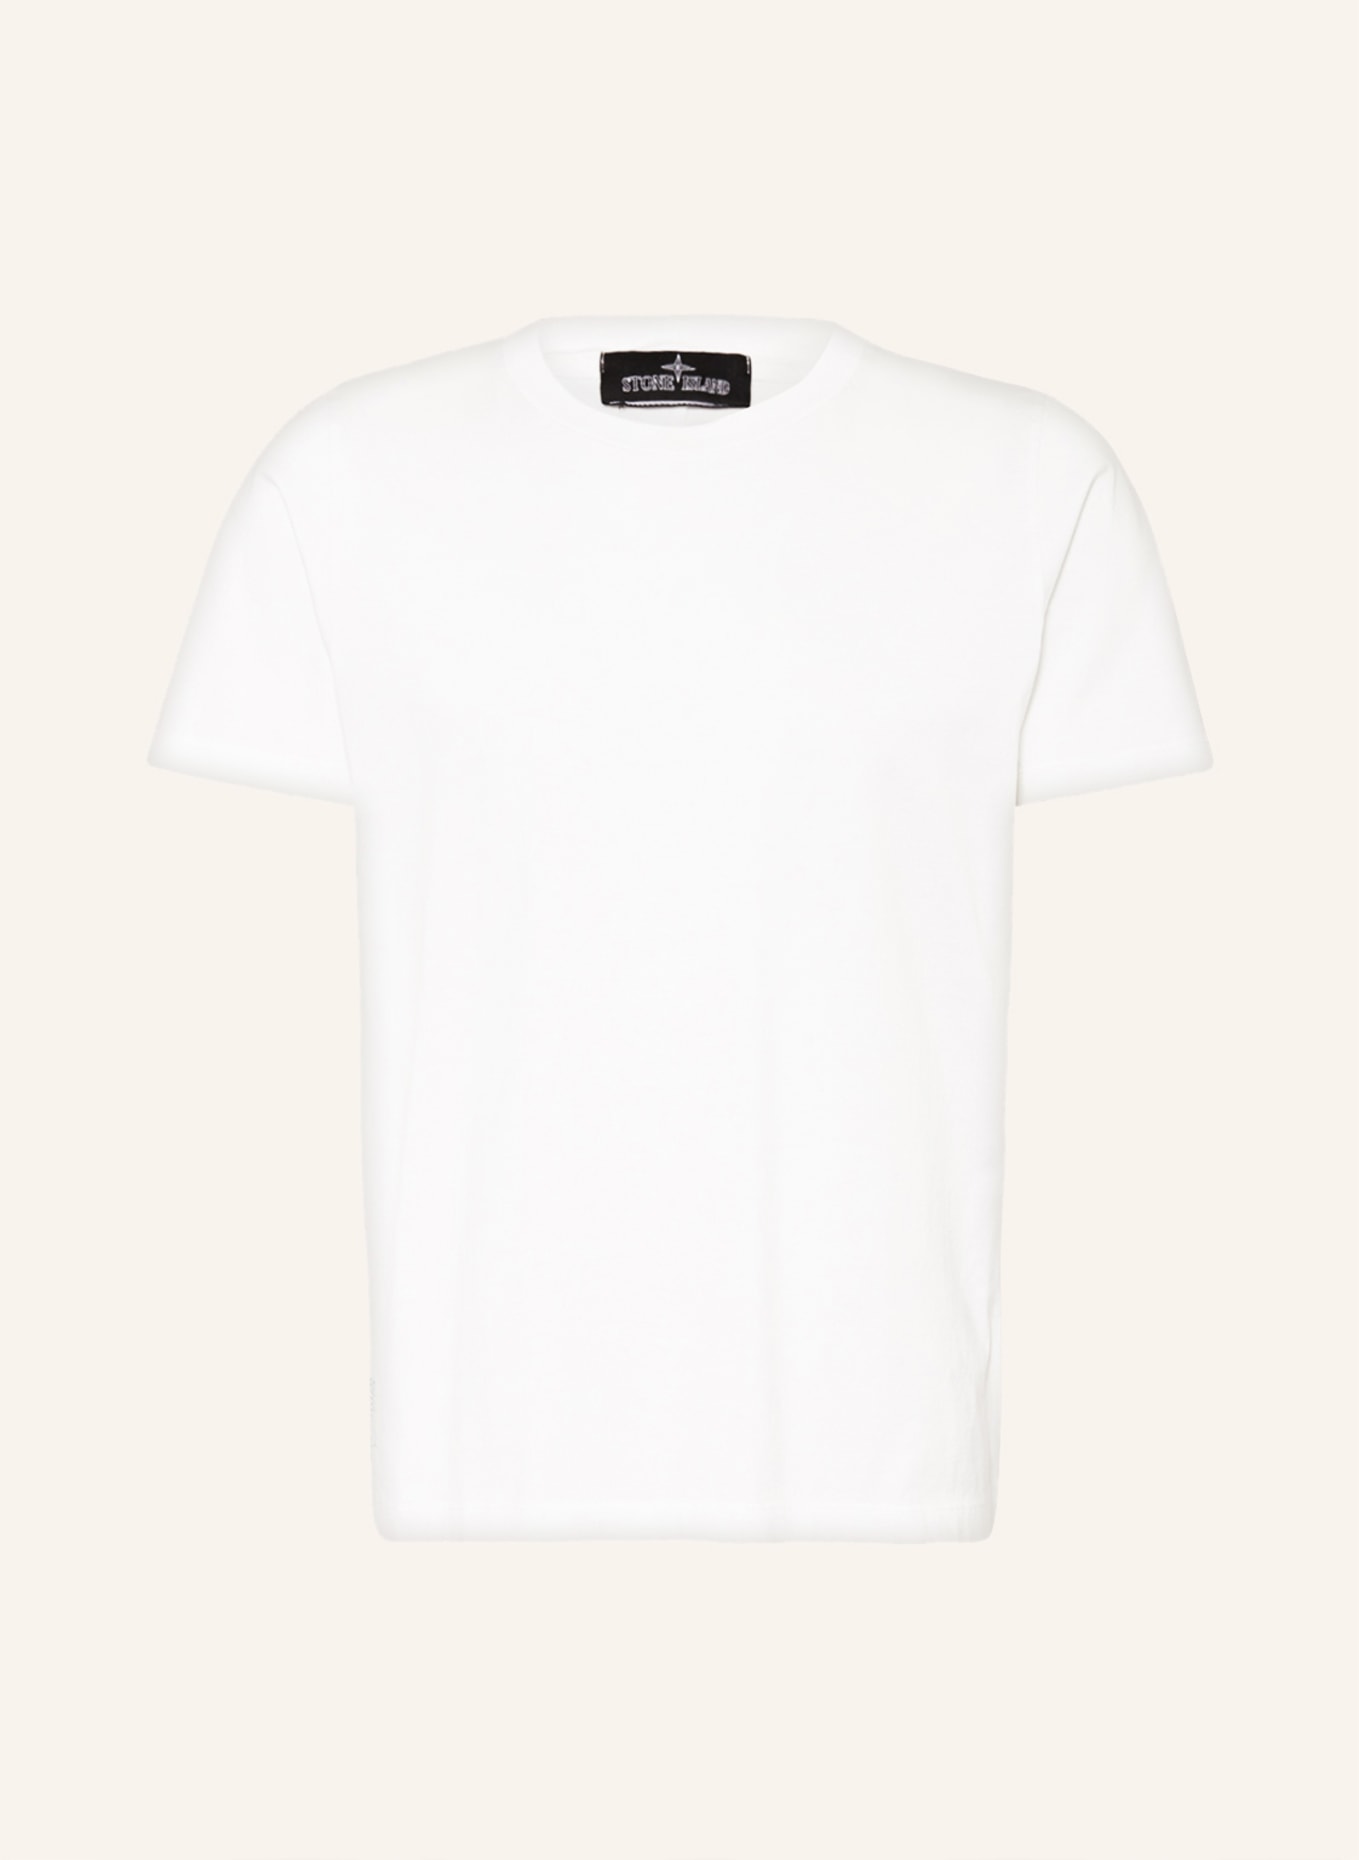 STONE ISLAND SHADOW PROJECT T-shirt, Color: WHITE (Image 1)